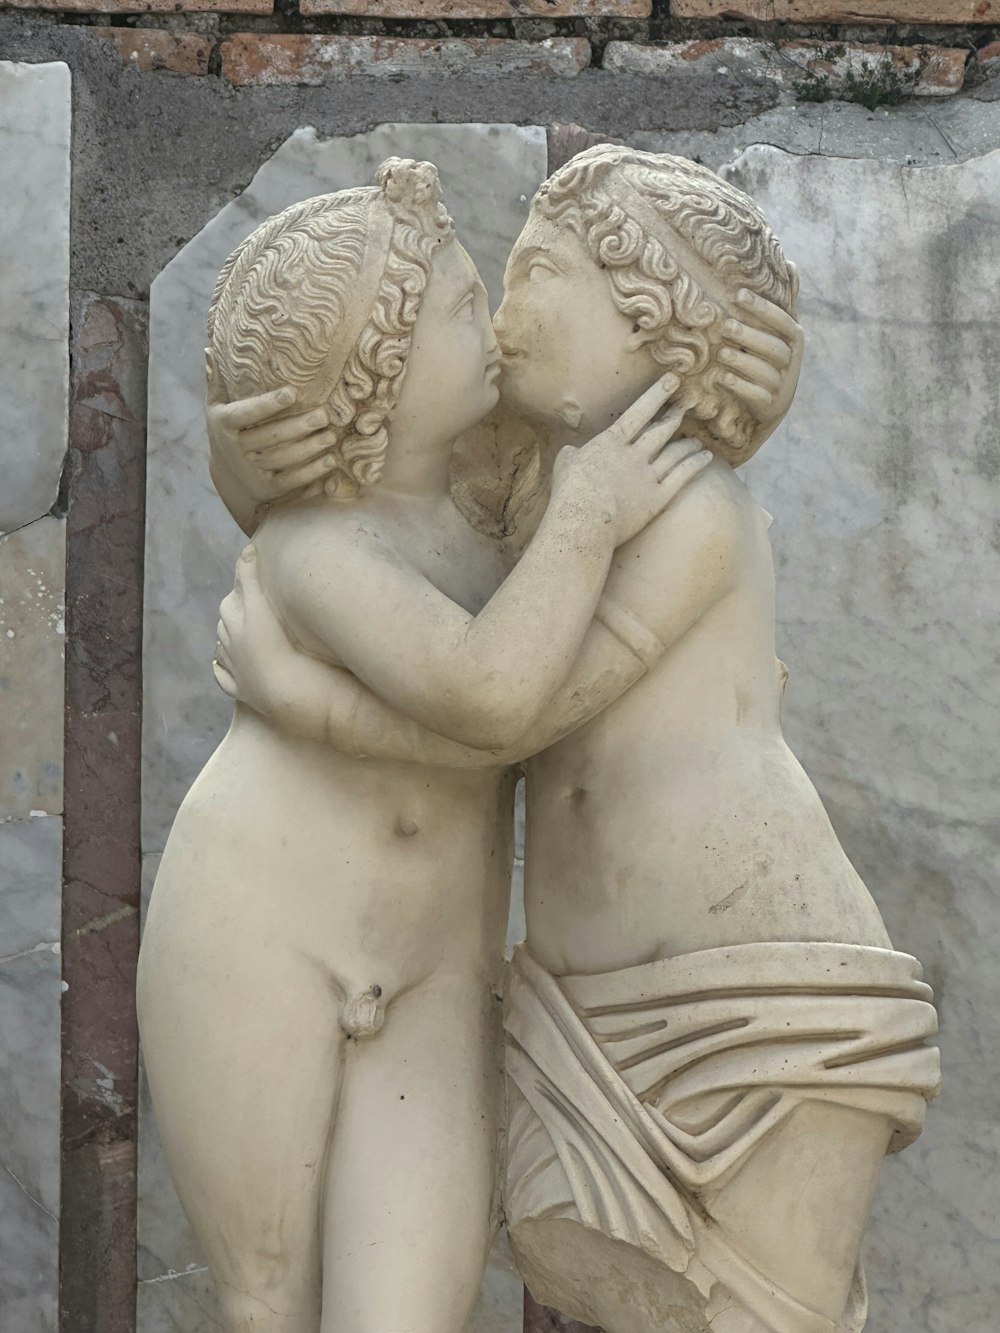 a statue of two women embracing each other